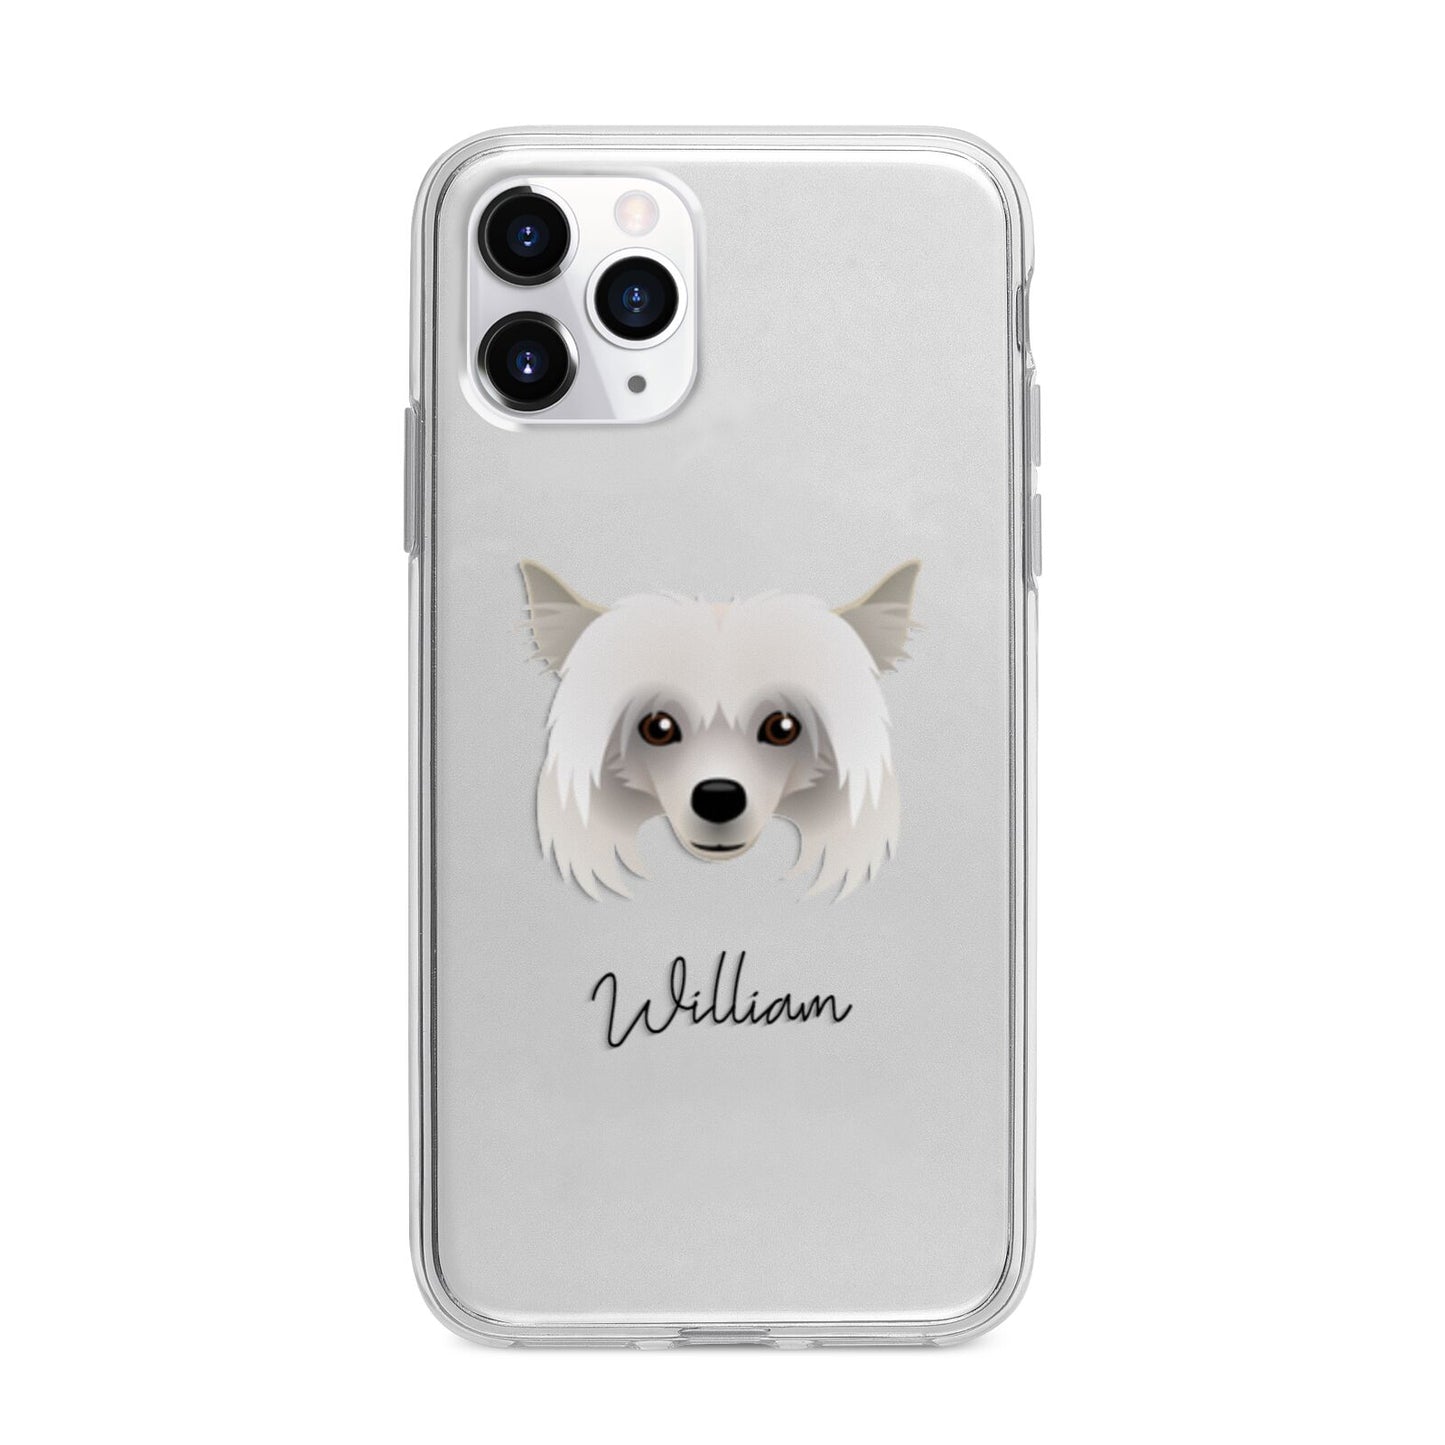 Powderpuff Chinese Crested Personalised Apple iPhone 11 Pro Max in Silver with Bumper Case